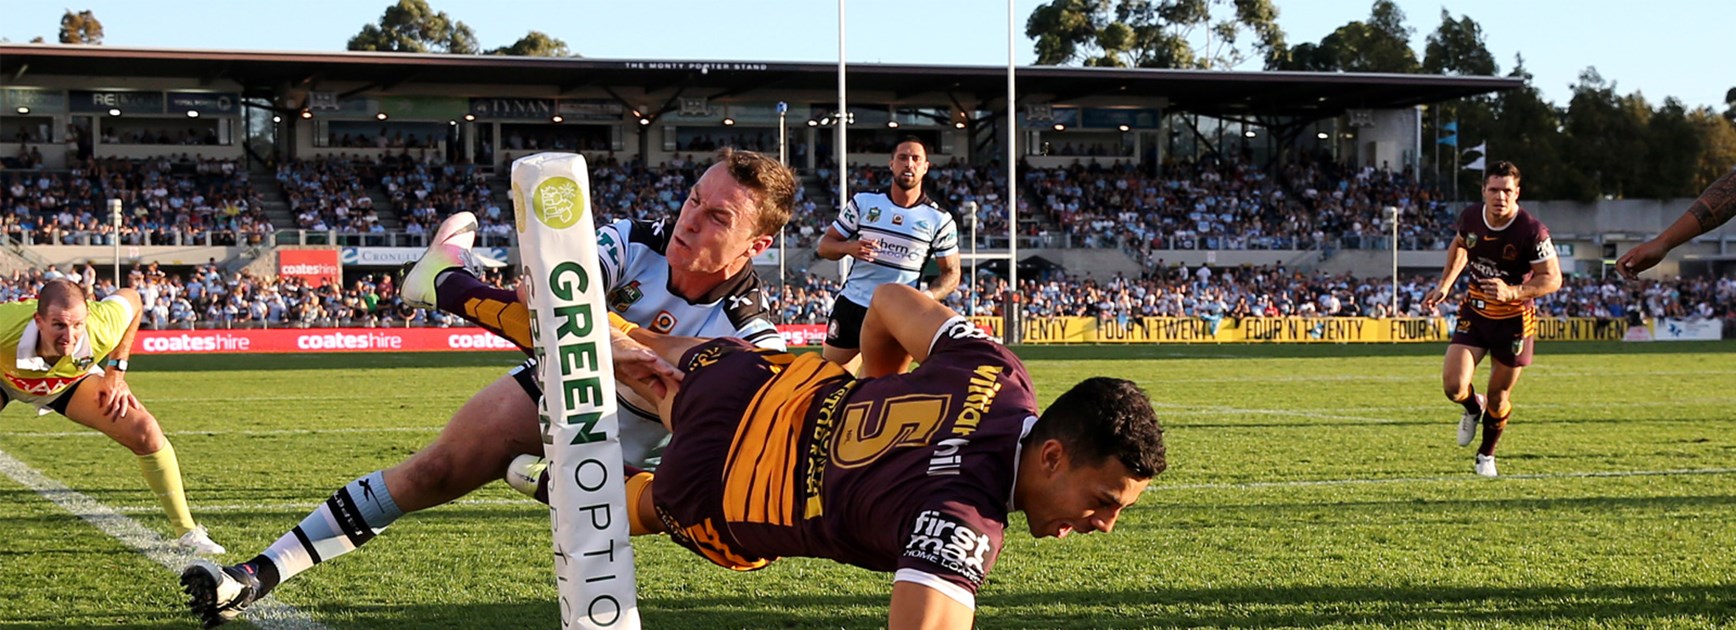 Jordan Kahu pulls off an acrobatic finish to score for Brisbane against the Sharks in Round 9.